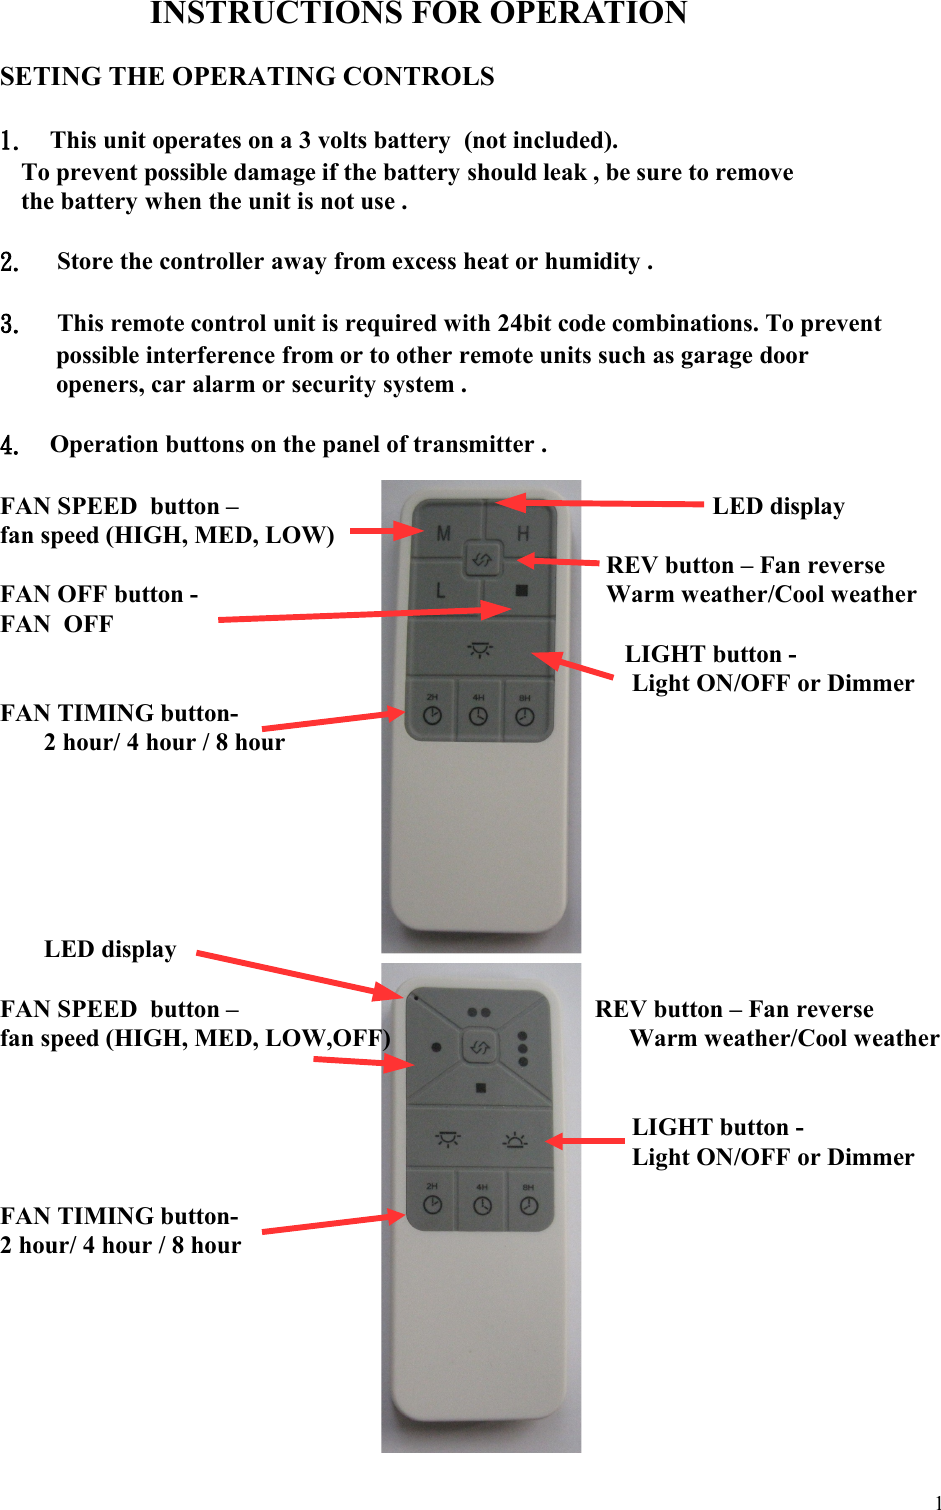 INSTRUCTIONS FOR OPERATIONSETING THE OPERATING CONTROLS1. This unit operates on a 3 volts battery  (not included).   To prevent possible damage if the battery should leak , be sure to remove   the battery when the unit is not use .2.  Store the controller away from excess heat or humidity .3.  This remote control unit is required with 24bit code combinations. To prevent possible interference from or to other remote units such as garage door openers, car alarm or security system .  4. Operation buttons on the panel of transmitter .  FAN SPEED  button –                                   LED displayfan speed (HIGH, MED, LOW)                 REV button – Fan reverseFAN OFF button -                        Warm weather/Cool weatherFAN  OFF                                                                                  LIGHT button -                                                                                      Light ON/OFF or Dimmer        FAN TIMING button-2 hour/ 4 hour / 8 hour                                                       LED displayFAN SPEED  button –                                                         REV button – Fan reversefan speed (HIGH, MED, LOW,OFF)                                      Warm weather/Cool weather                                                                                     LIGHT button -                                                                                      Light ON/OFF or Dimmer              FAN TIMING button-2 hour/ 4 hour / 8 hour                                                                                                                                                           1